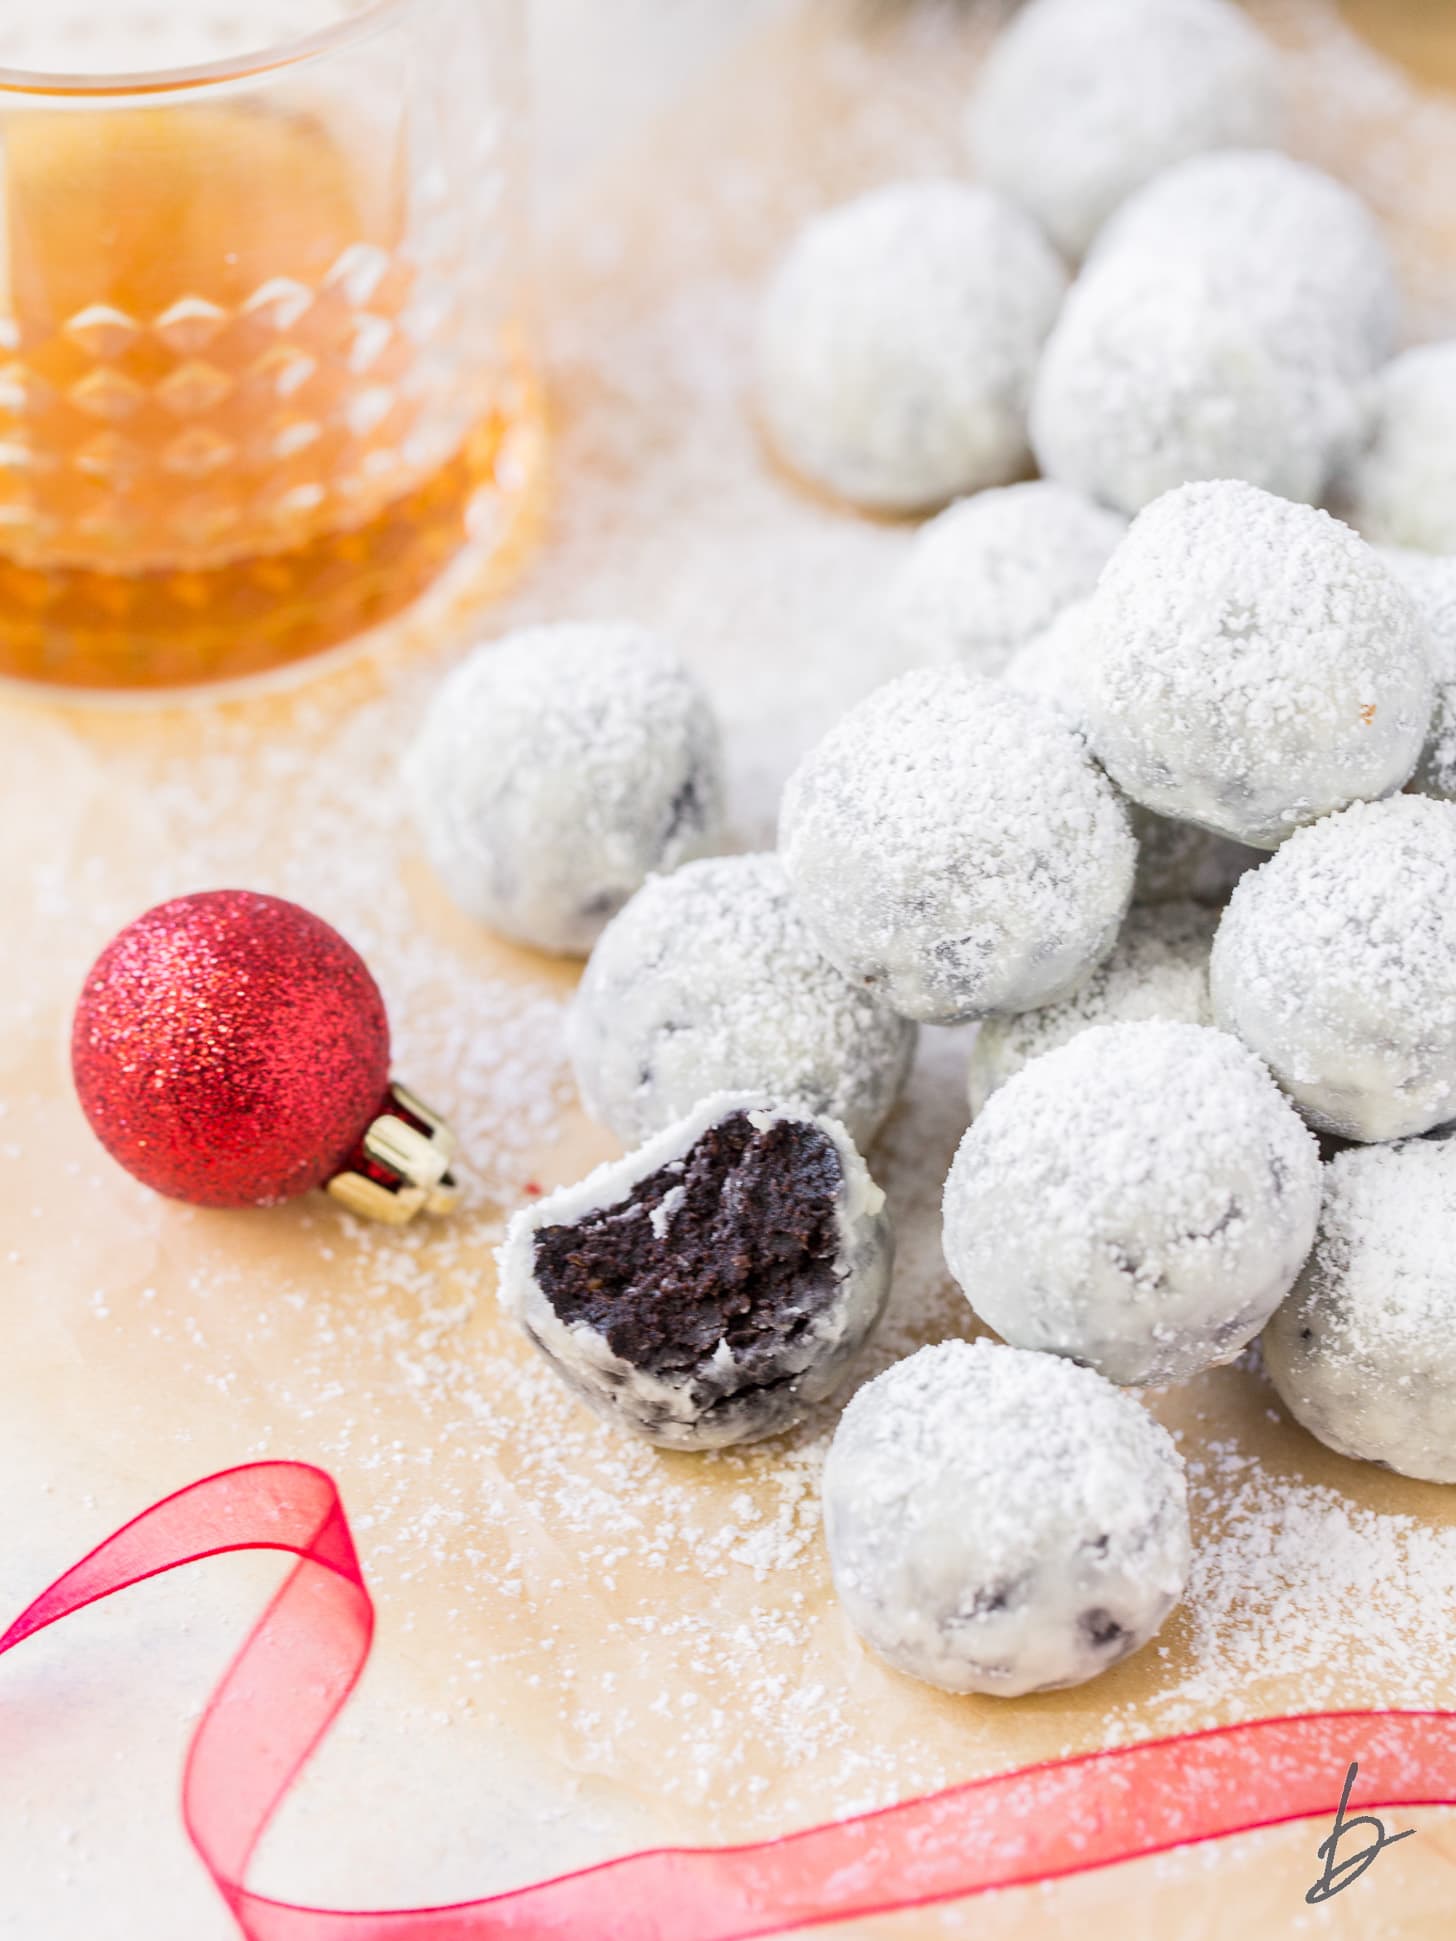 rum ball with a bite in front of pile of rum balls coated in confectioners' sugar.